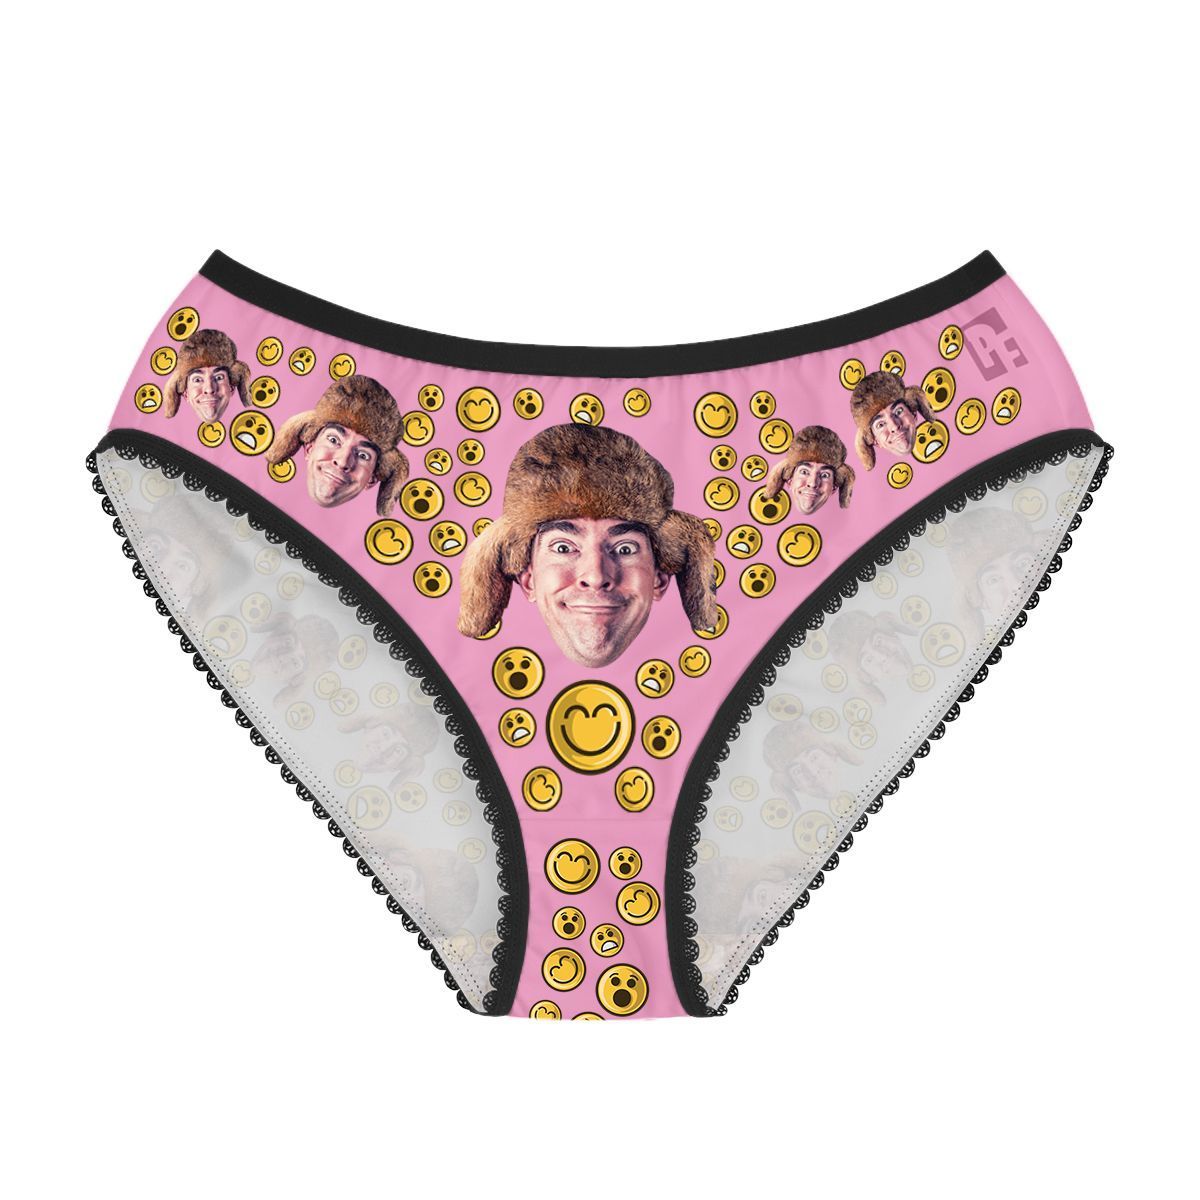 Pink Smiles women's underwear briefs personalized with photo printed on them